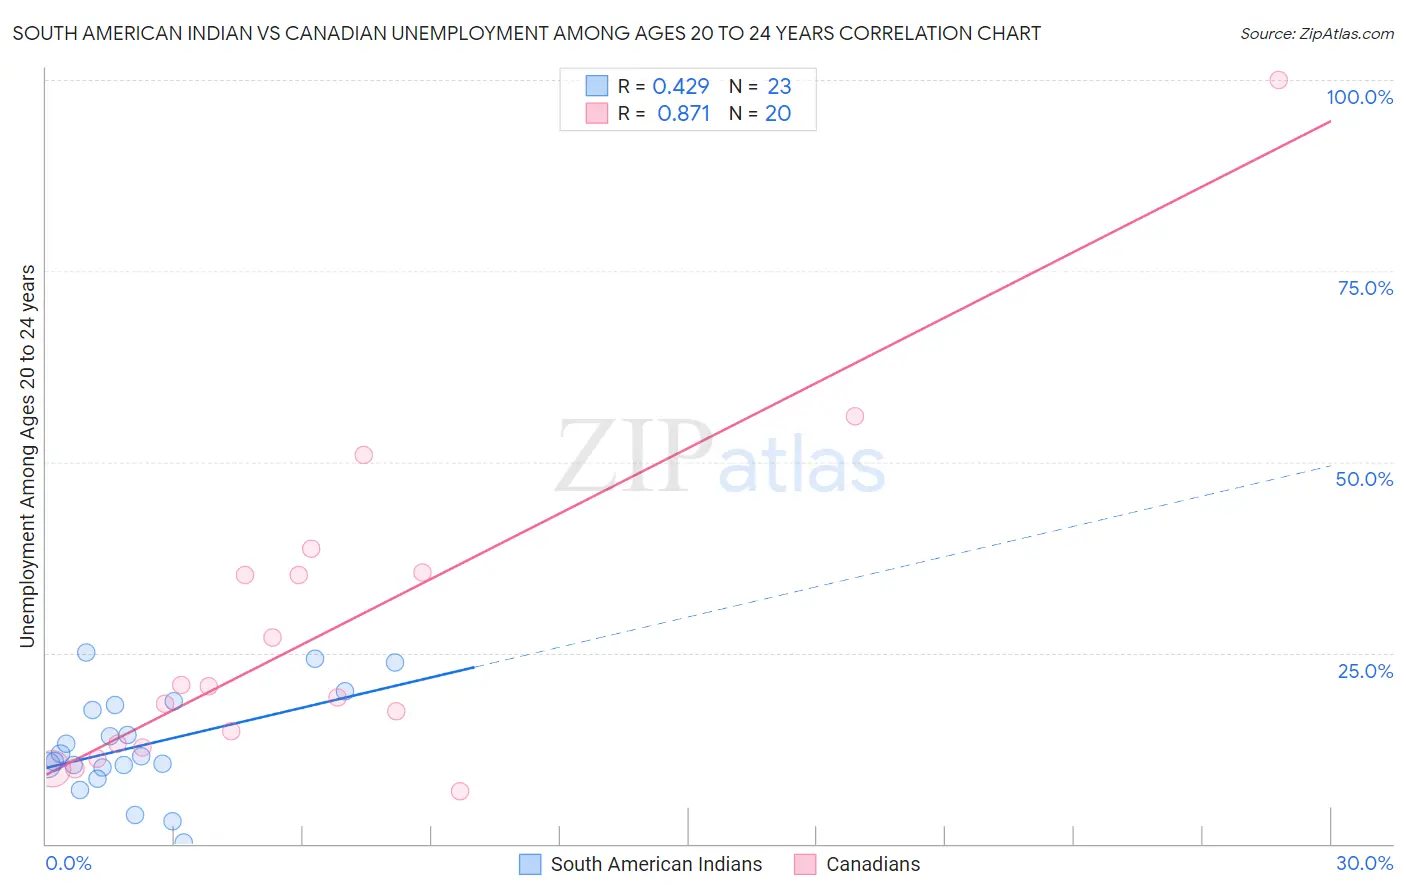 South American Indian vs Canadian Unemployment Among Ages 20 to 24 years